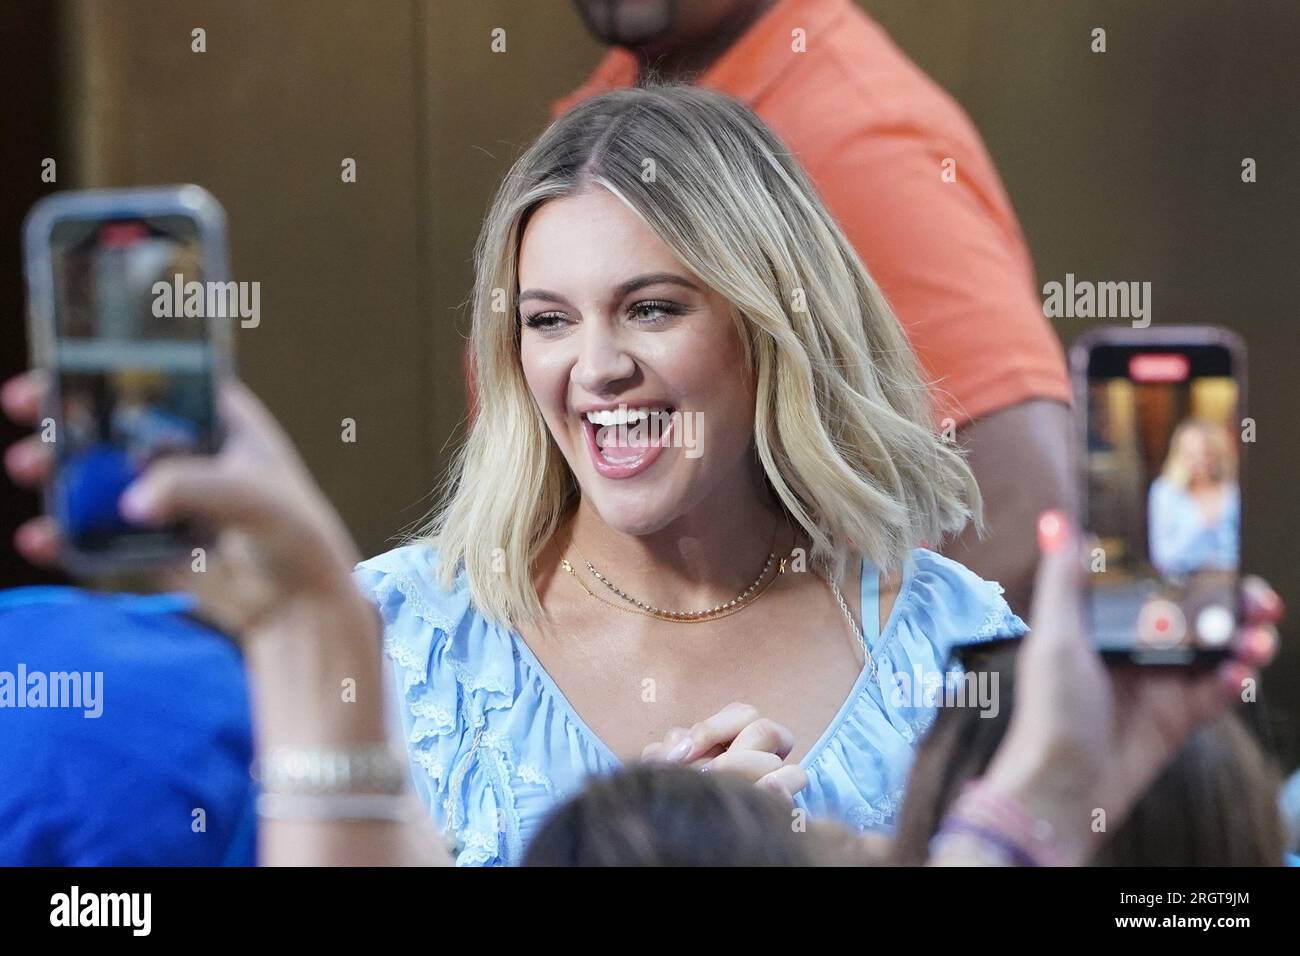 New York, NY, USA. 11th Aug, 2023. Kelsea Ballerini on stage for NBC Today Show Concert Series with Kelsea Ballerini, Rockefeller Plaza, New York, NY August 11, 2023. Credit: Kristin Callahan/Everett Collection/Alamy Live News Stock Photo